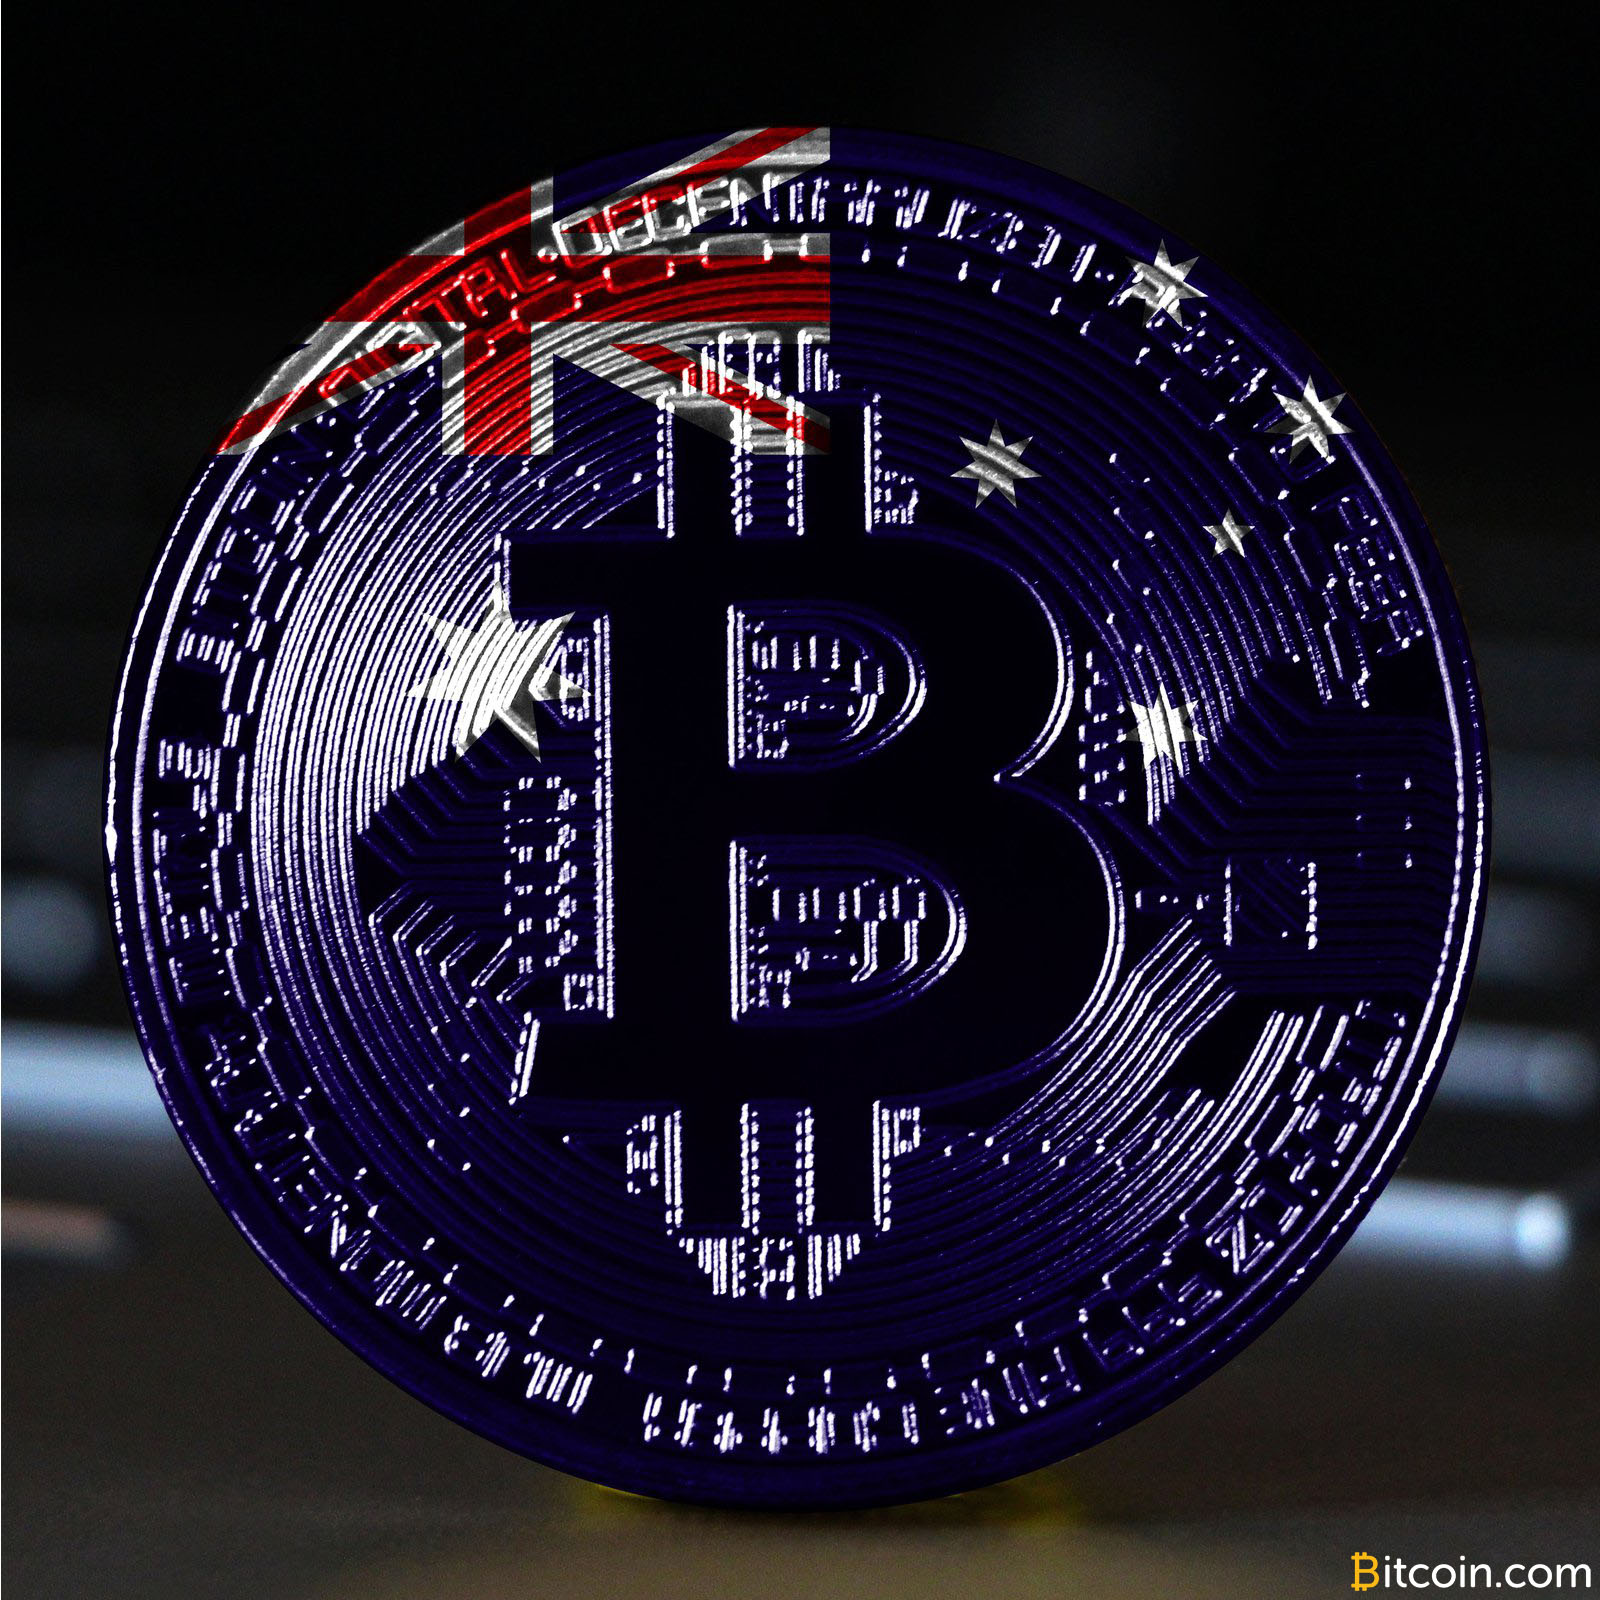 Australian Company Processes $1 Million Worth of Cryptocurrency in Bill Payments Weekly